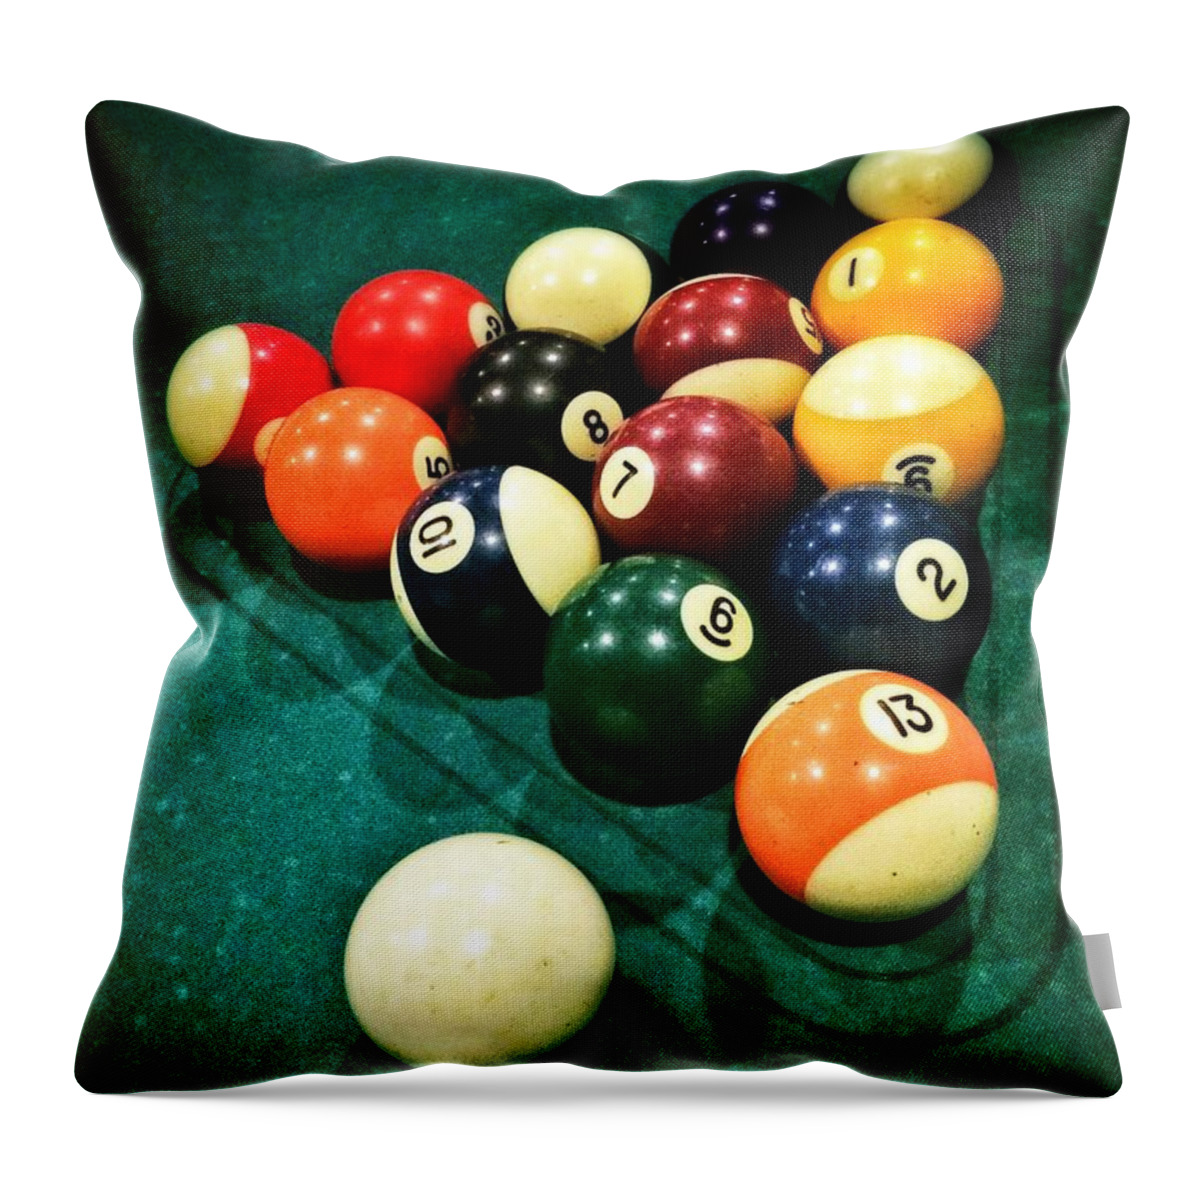 8 Ball Throw Pillow featuring the photograph Pool Balls by Carlos Caetano